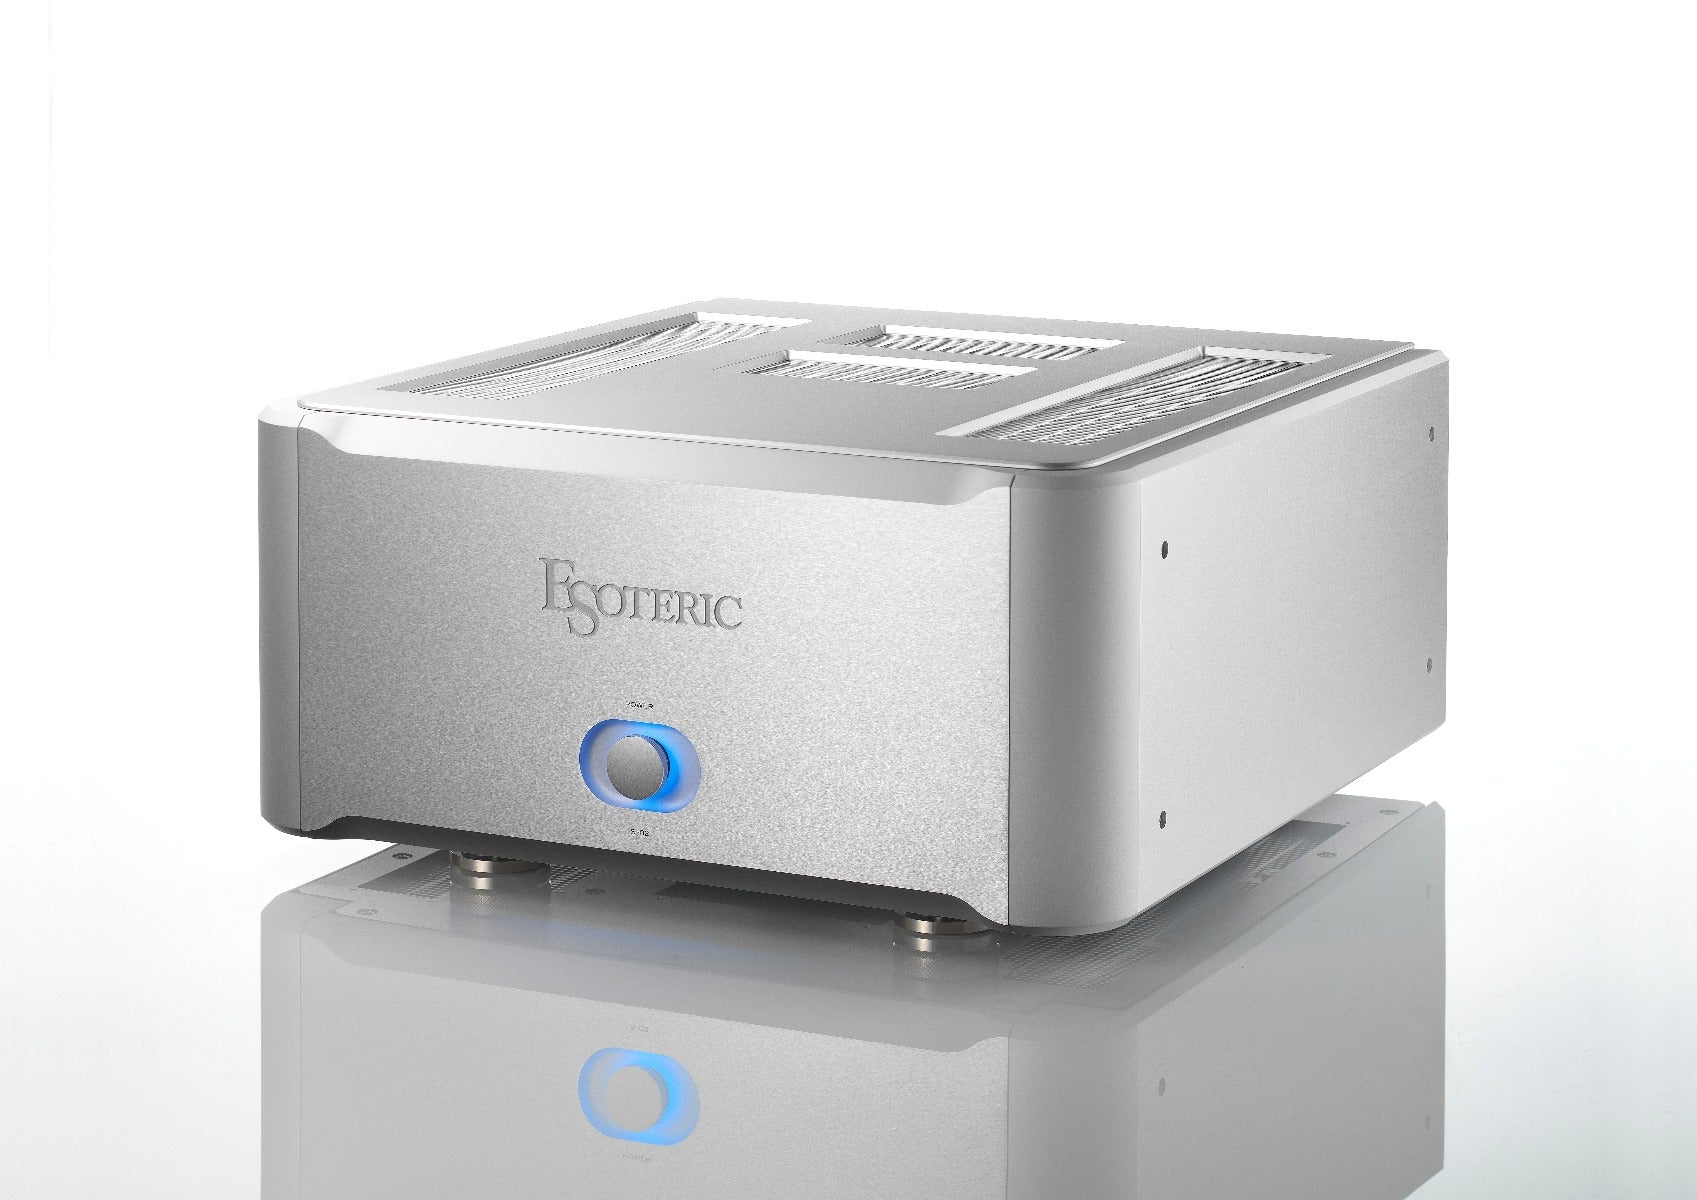 Esoteric S-02 Stereo Power Amplifier